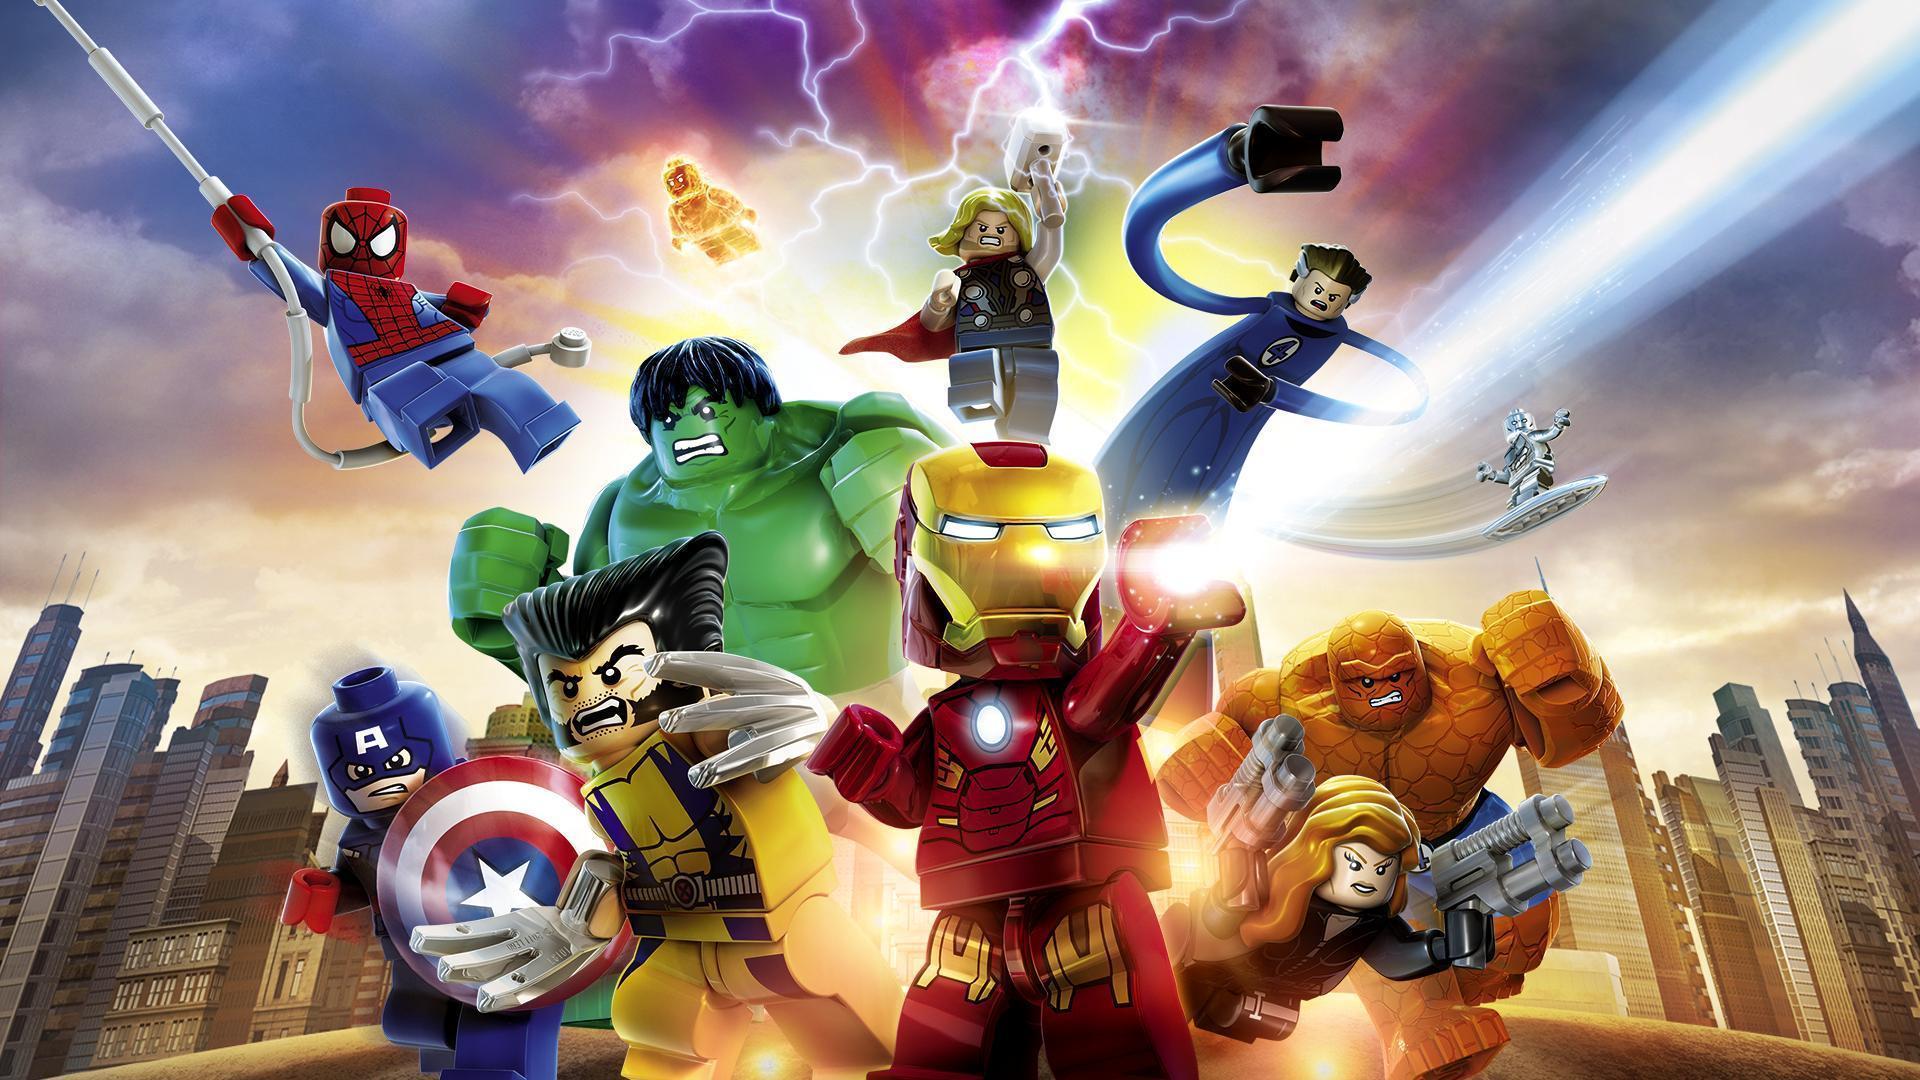 Free Download Lego Marvel Super Heroes Wallpapers Top Lego Marvel Images, Photos, Reviews